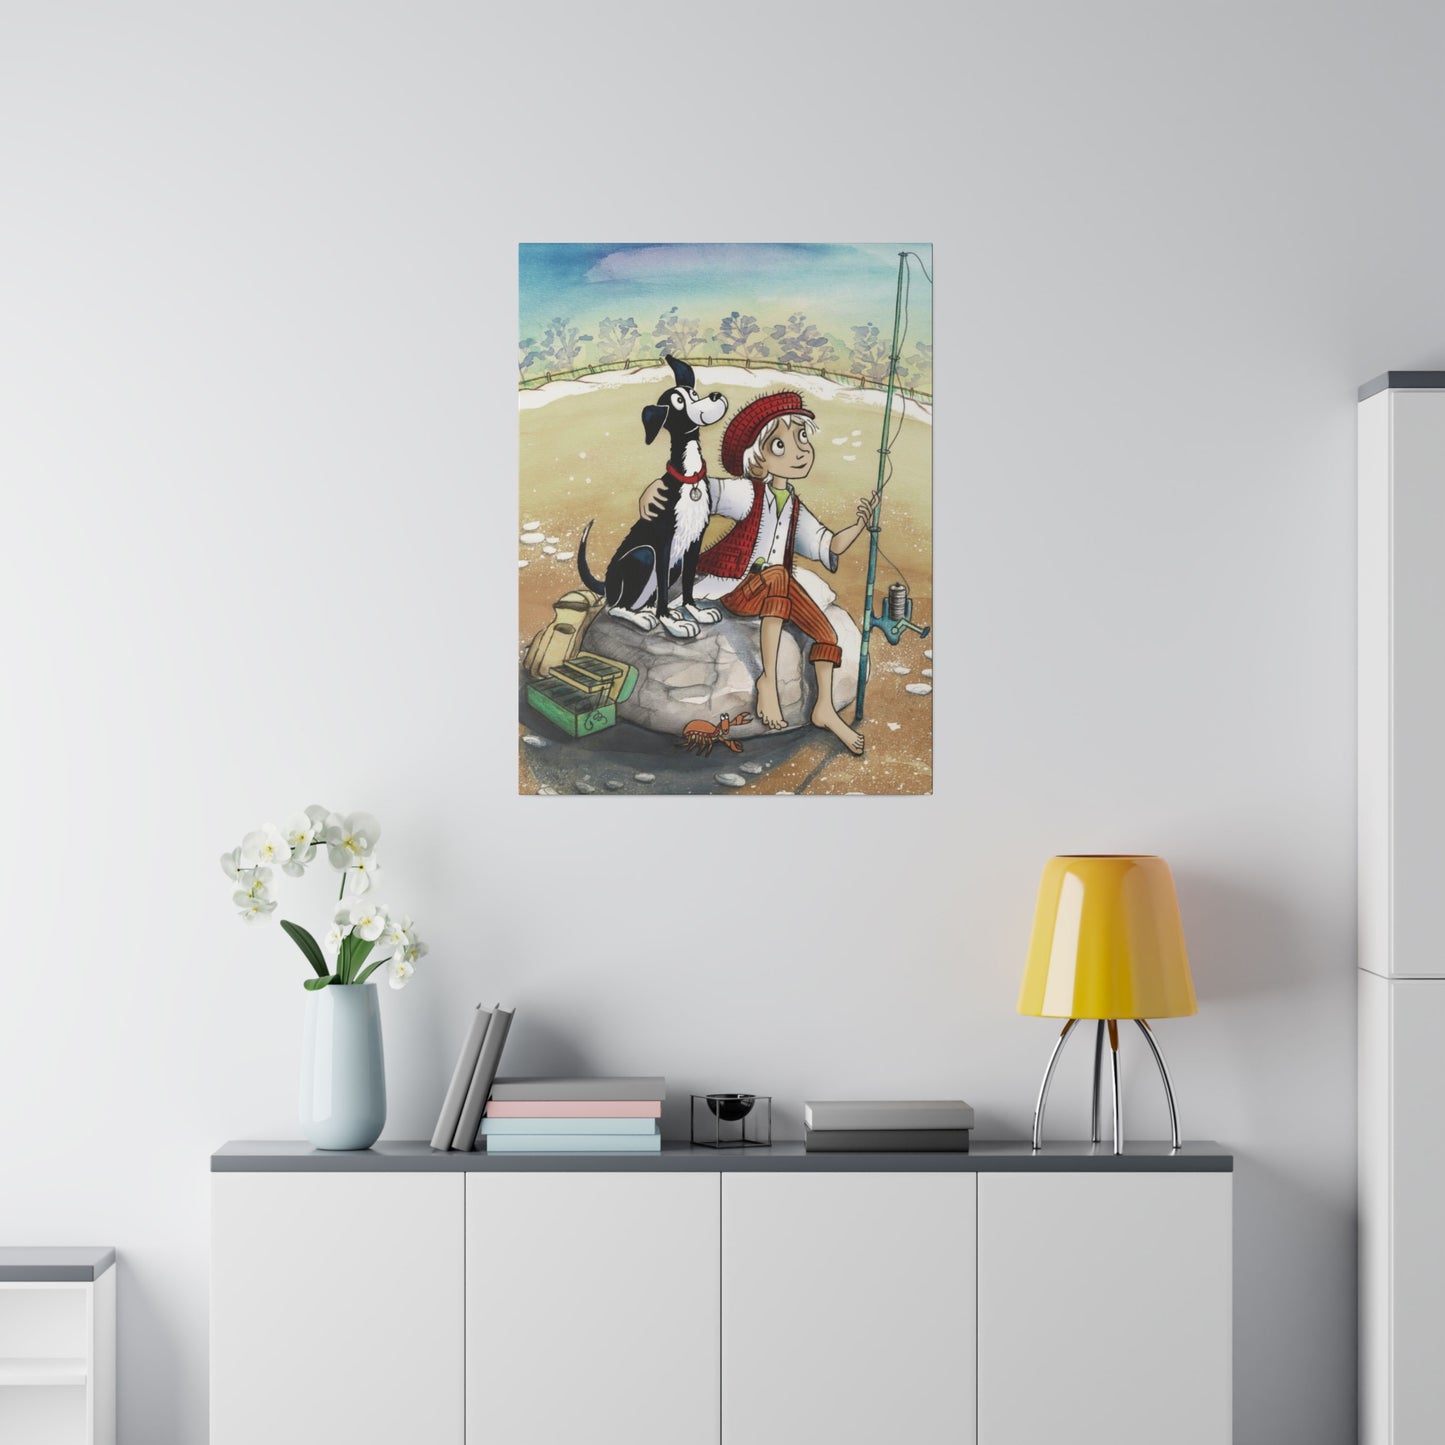 A 18" x 24" 'Dogs Pure Love Fishing' canvas hangs on a wall, above a narrow cabinet, which features a yellow lamp, books, and a vase of flowers.